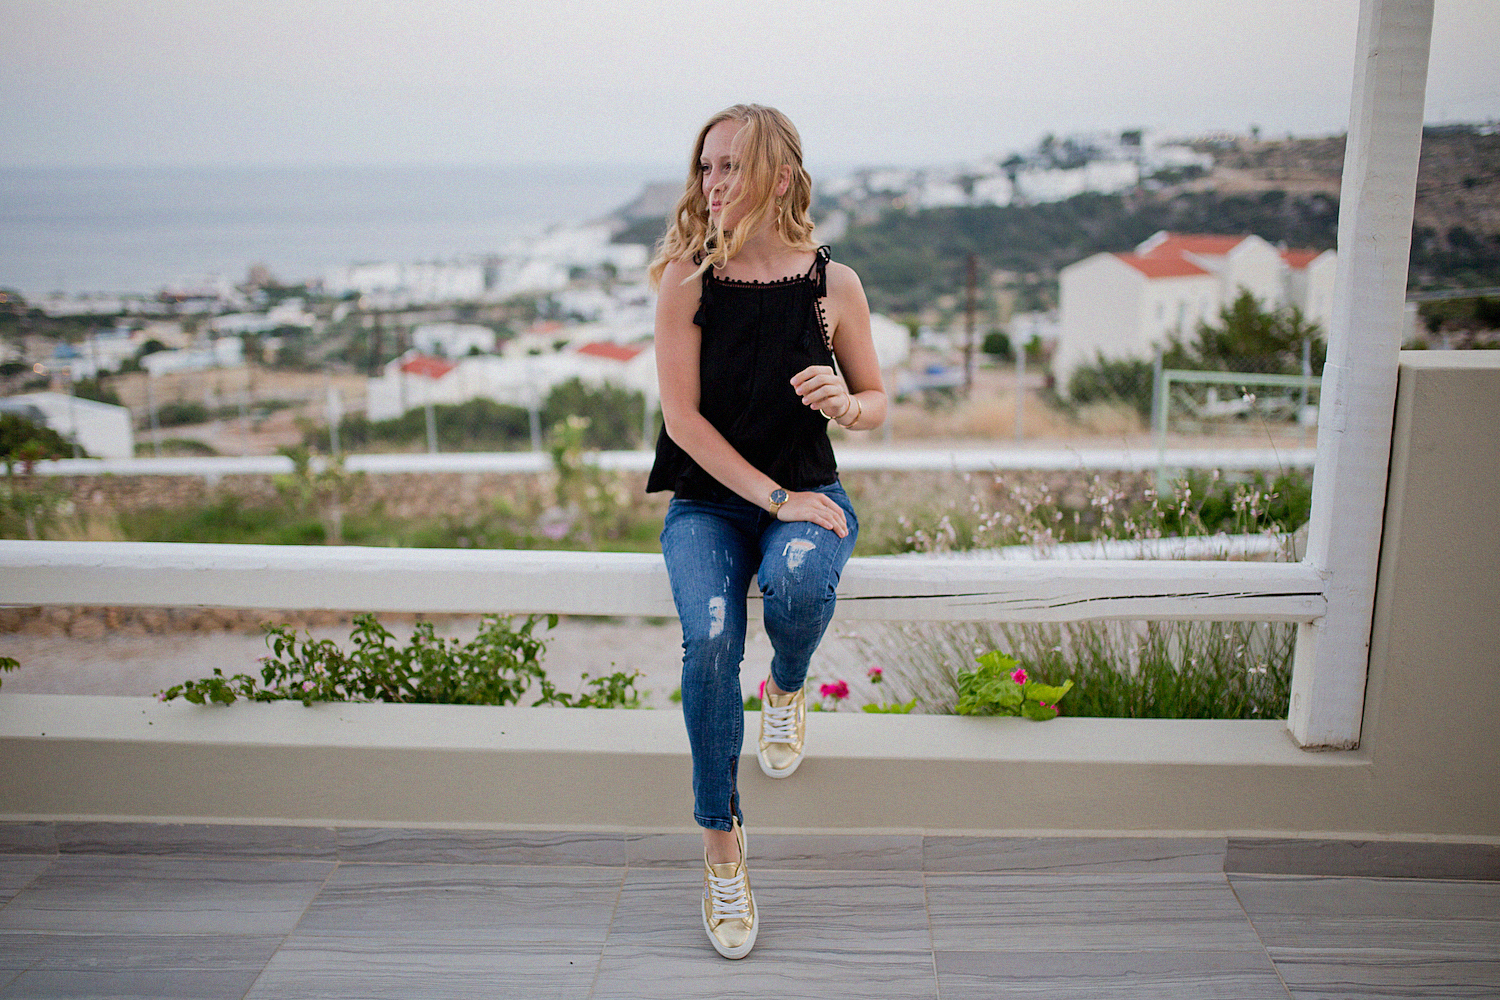 seafolly top, superga gold, guess jeans 